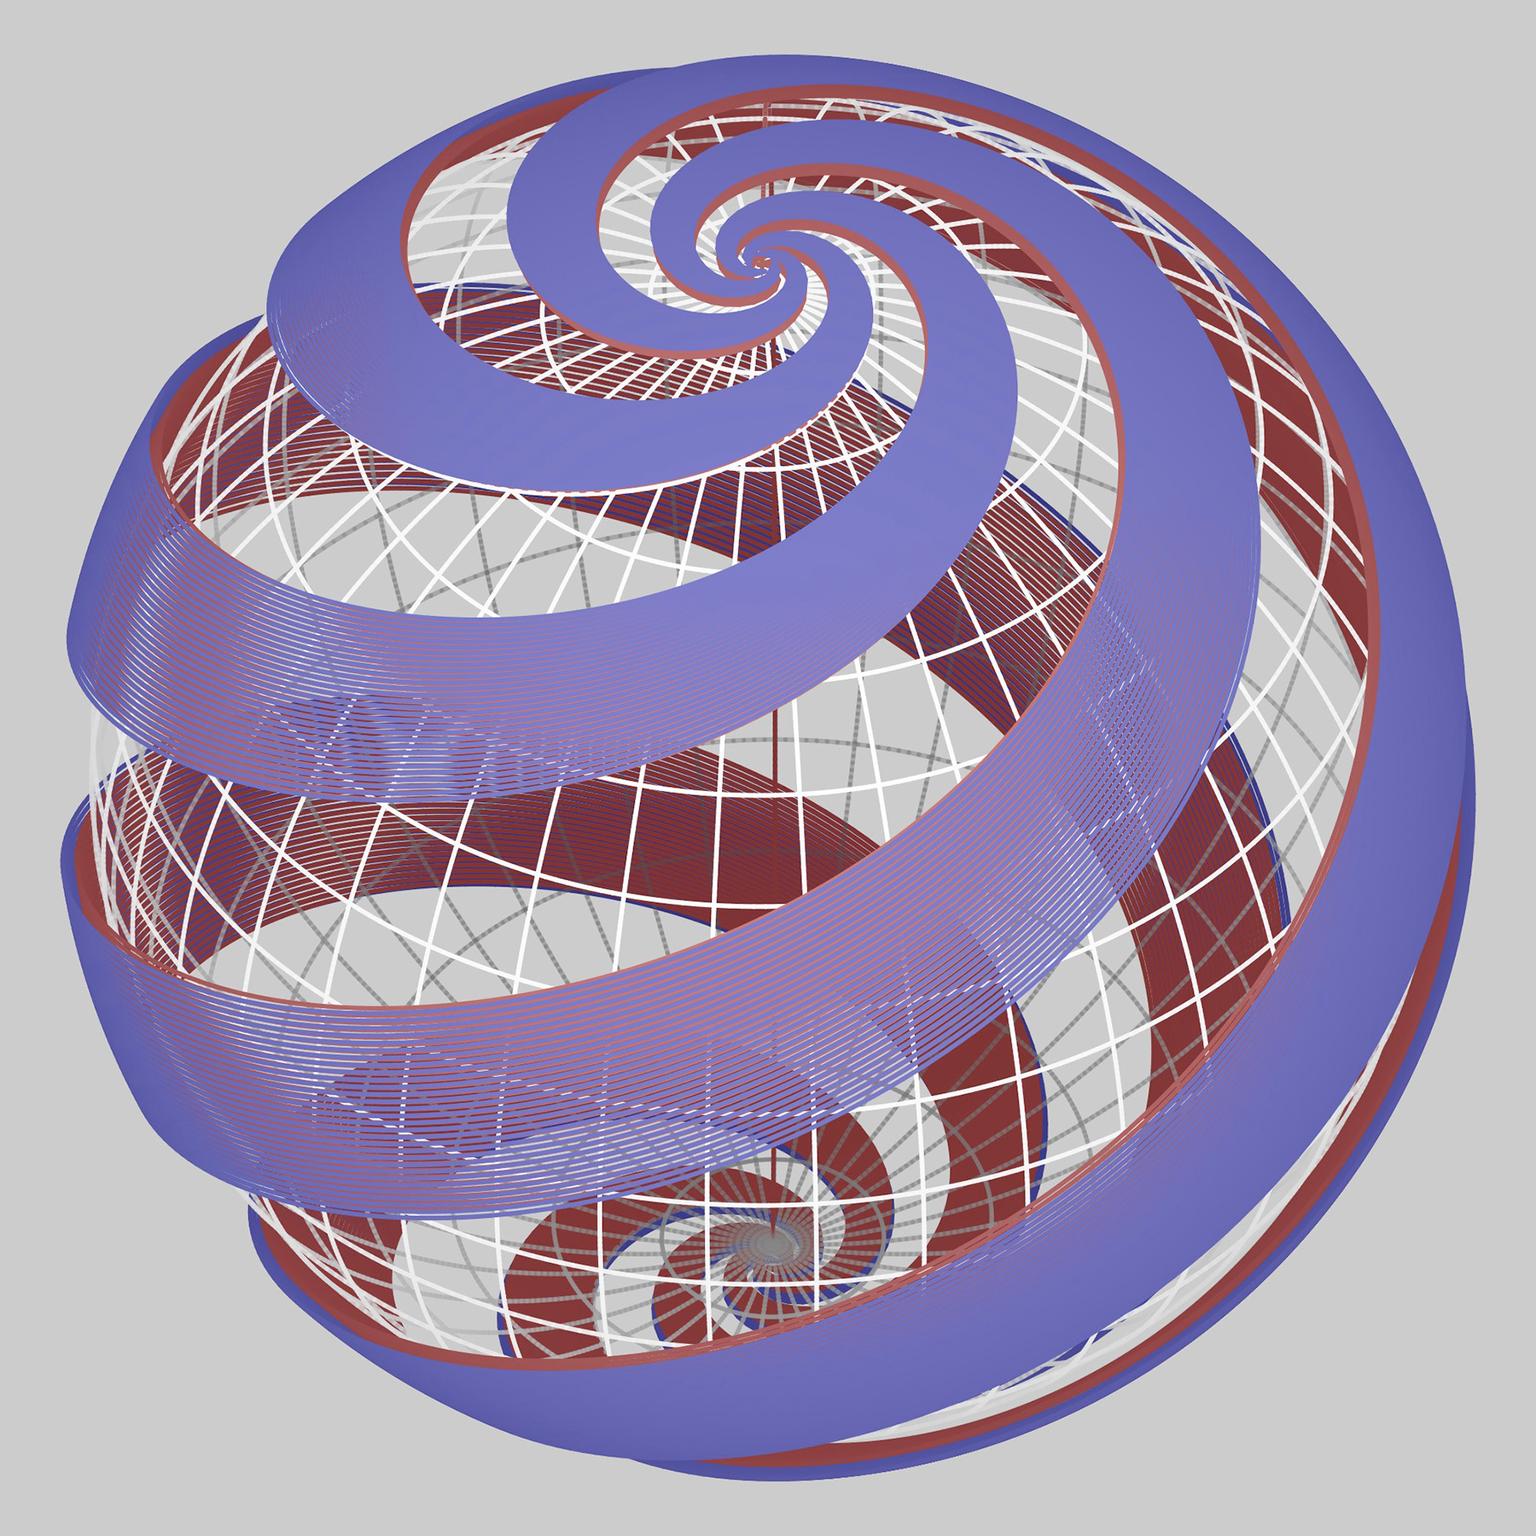 Image for entry 'Escher's Sphere'